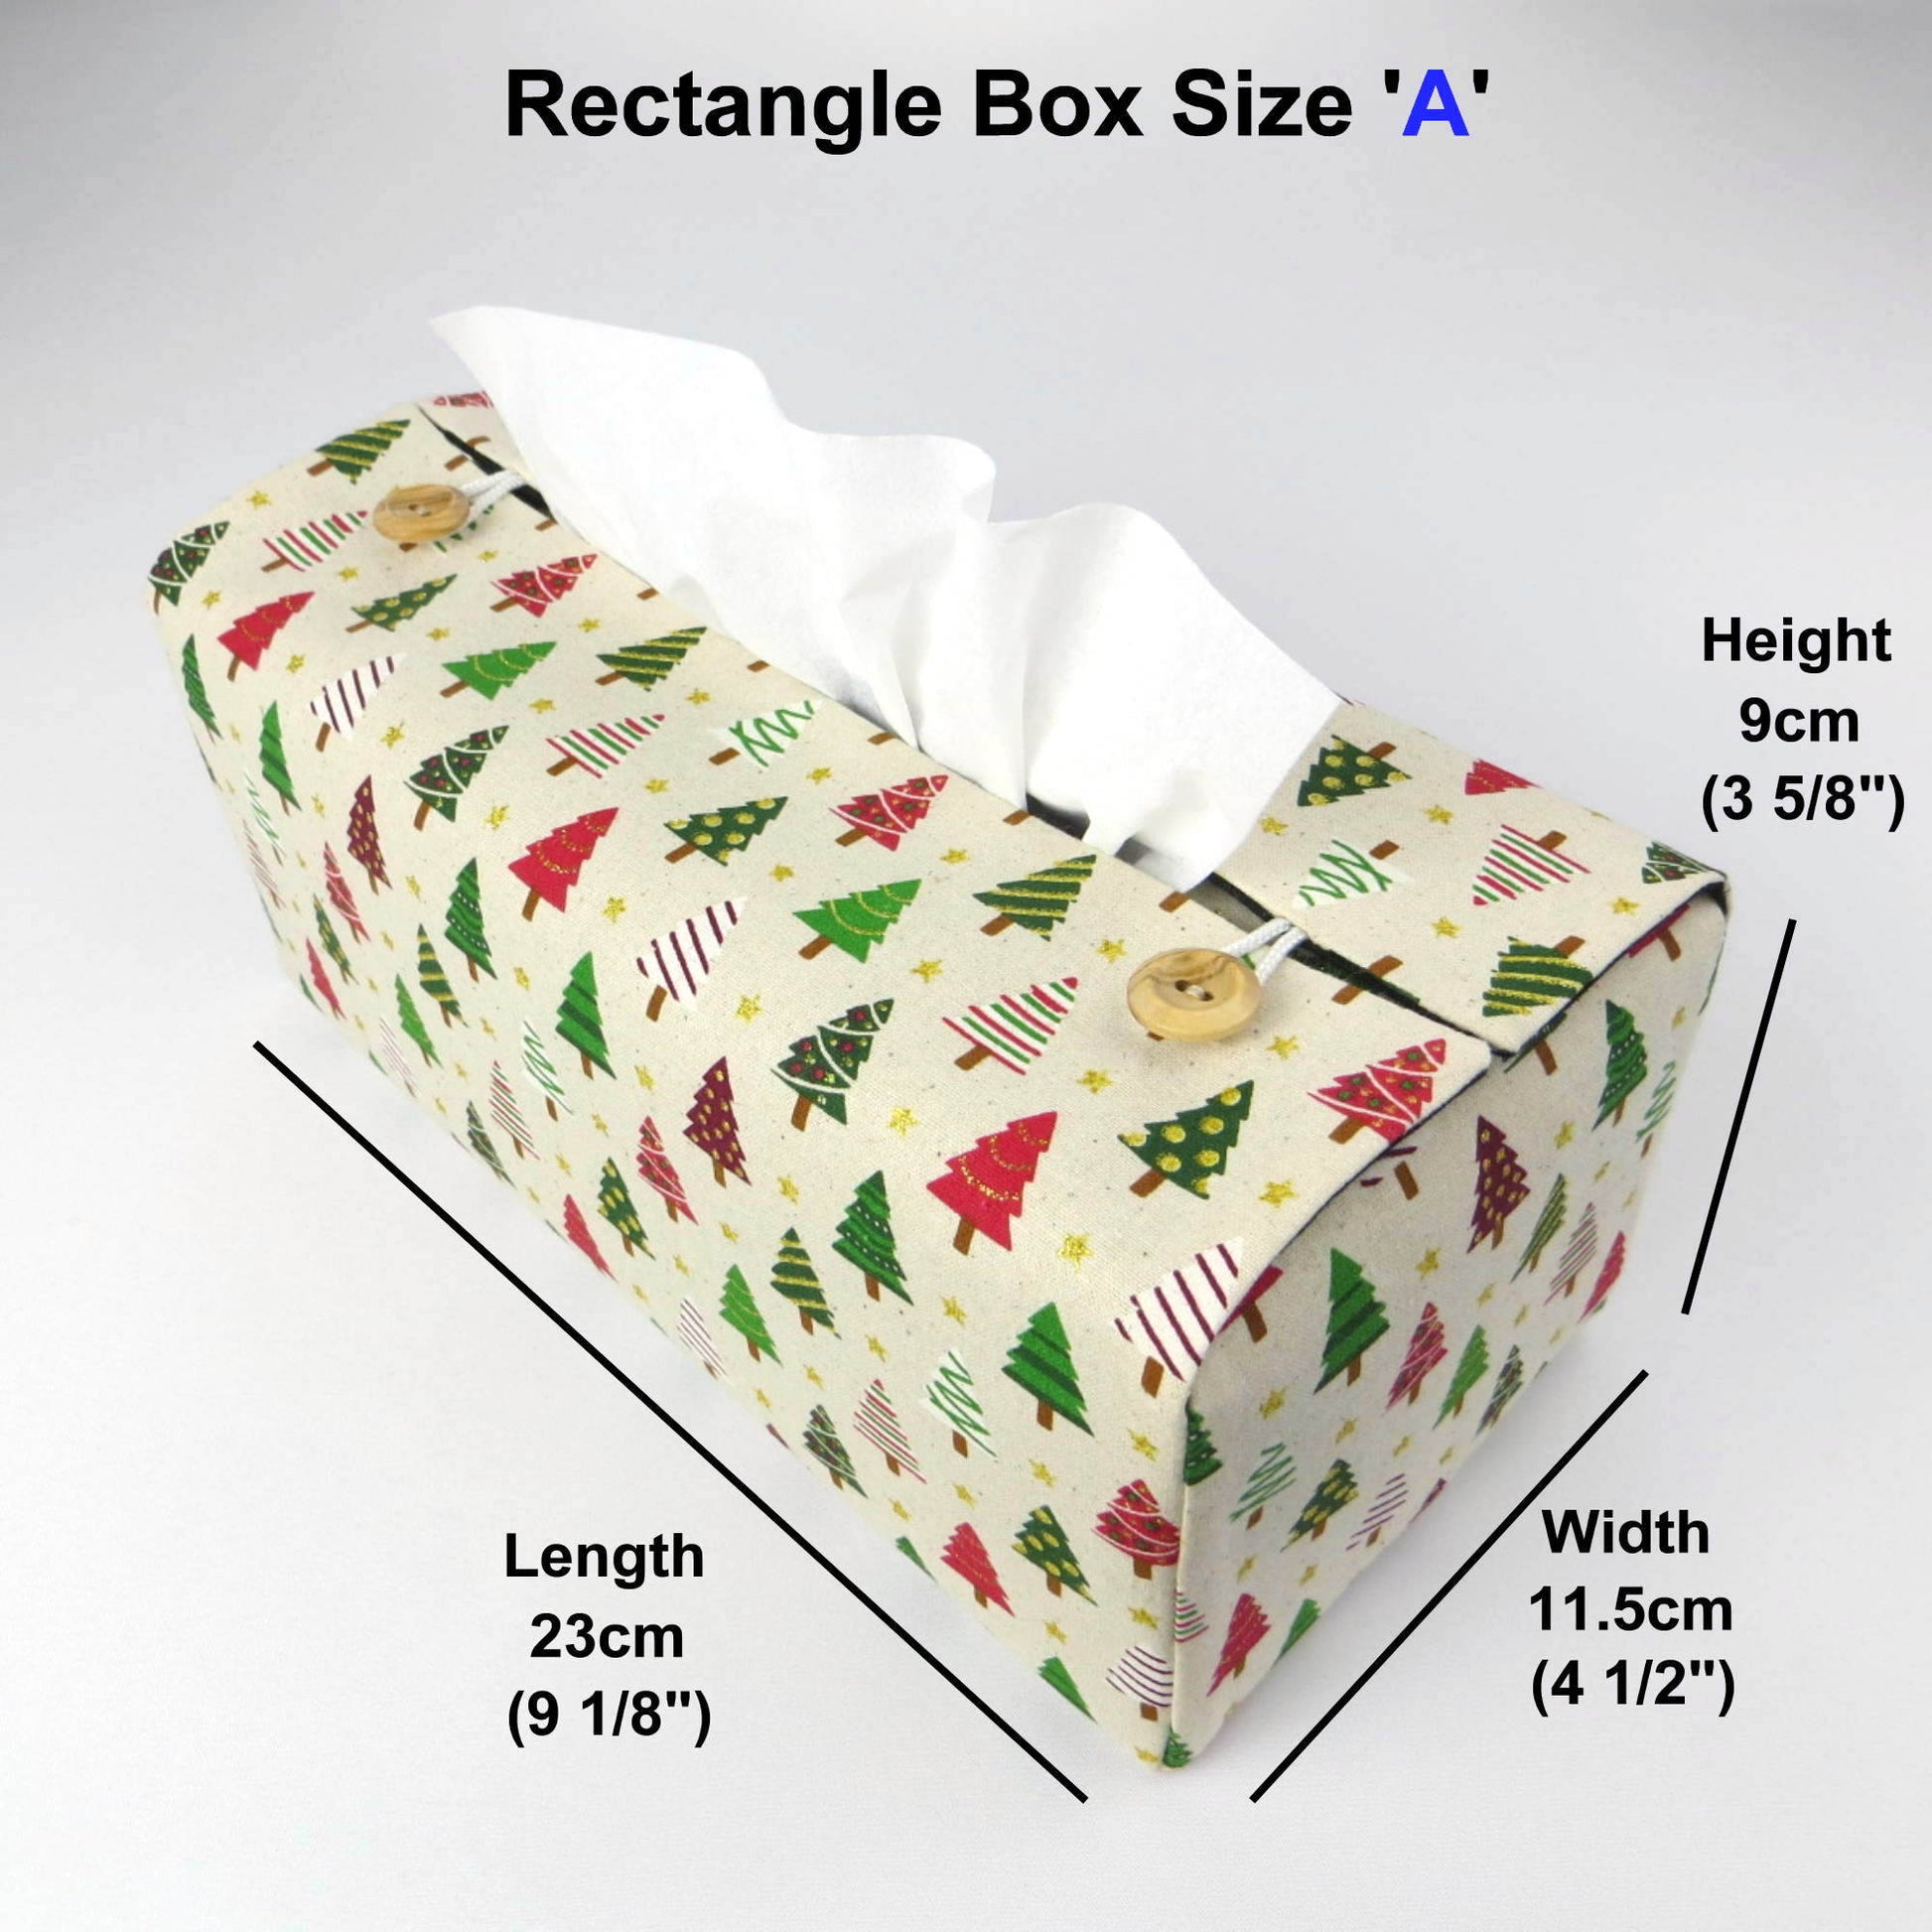 Rectangular tissue box cover with holiday themed multi colour decorated Christmas trees design on beige background